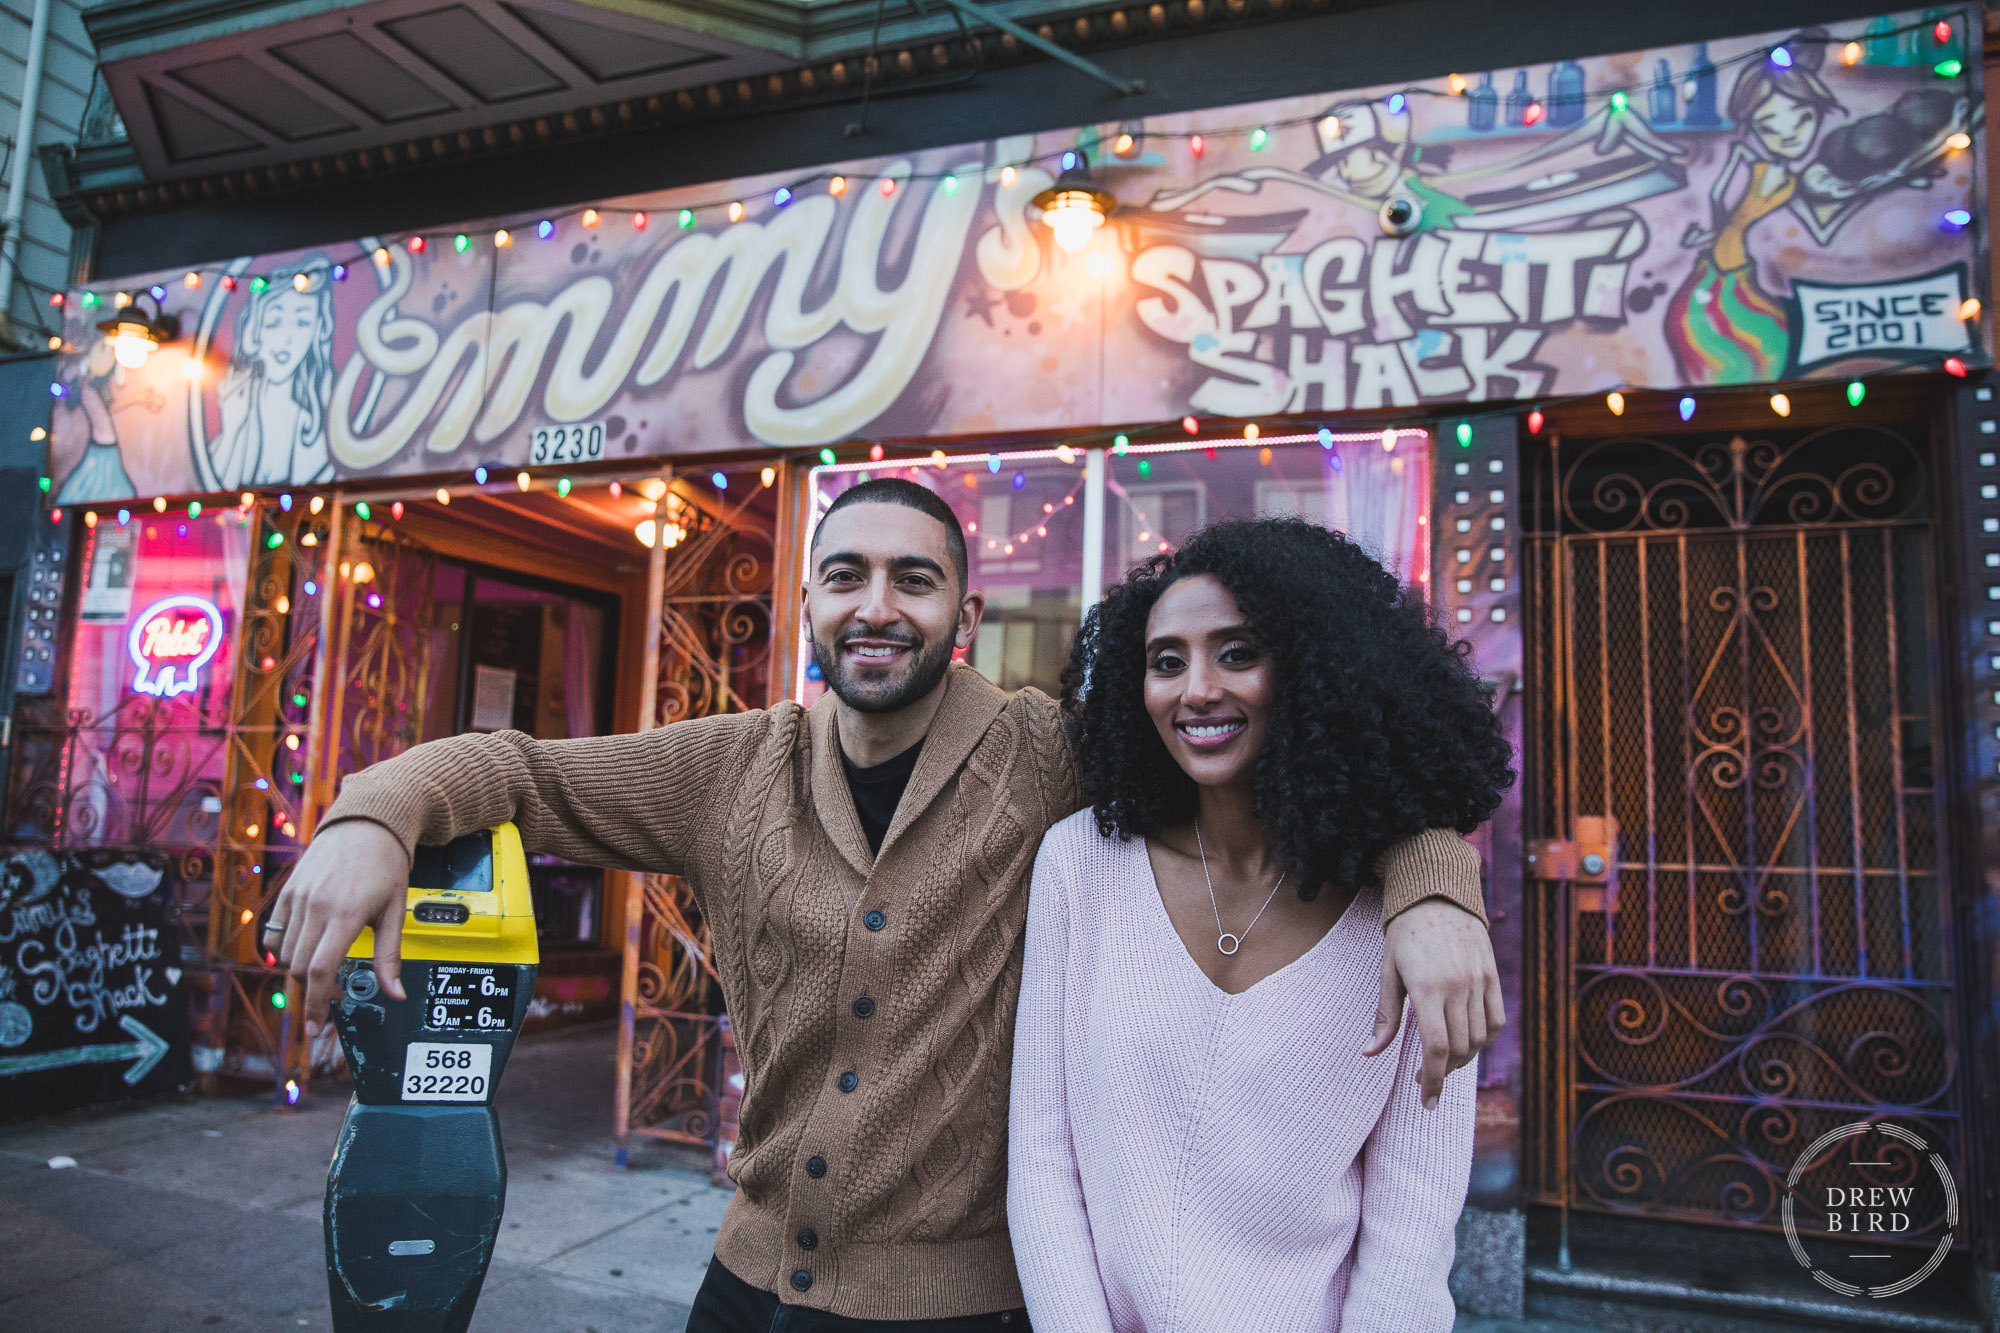 SF urban engagement shoot with wedding couple at Emmy's Spaghetti Shack.